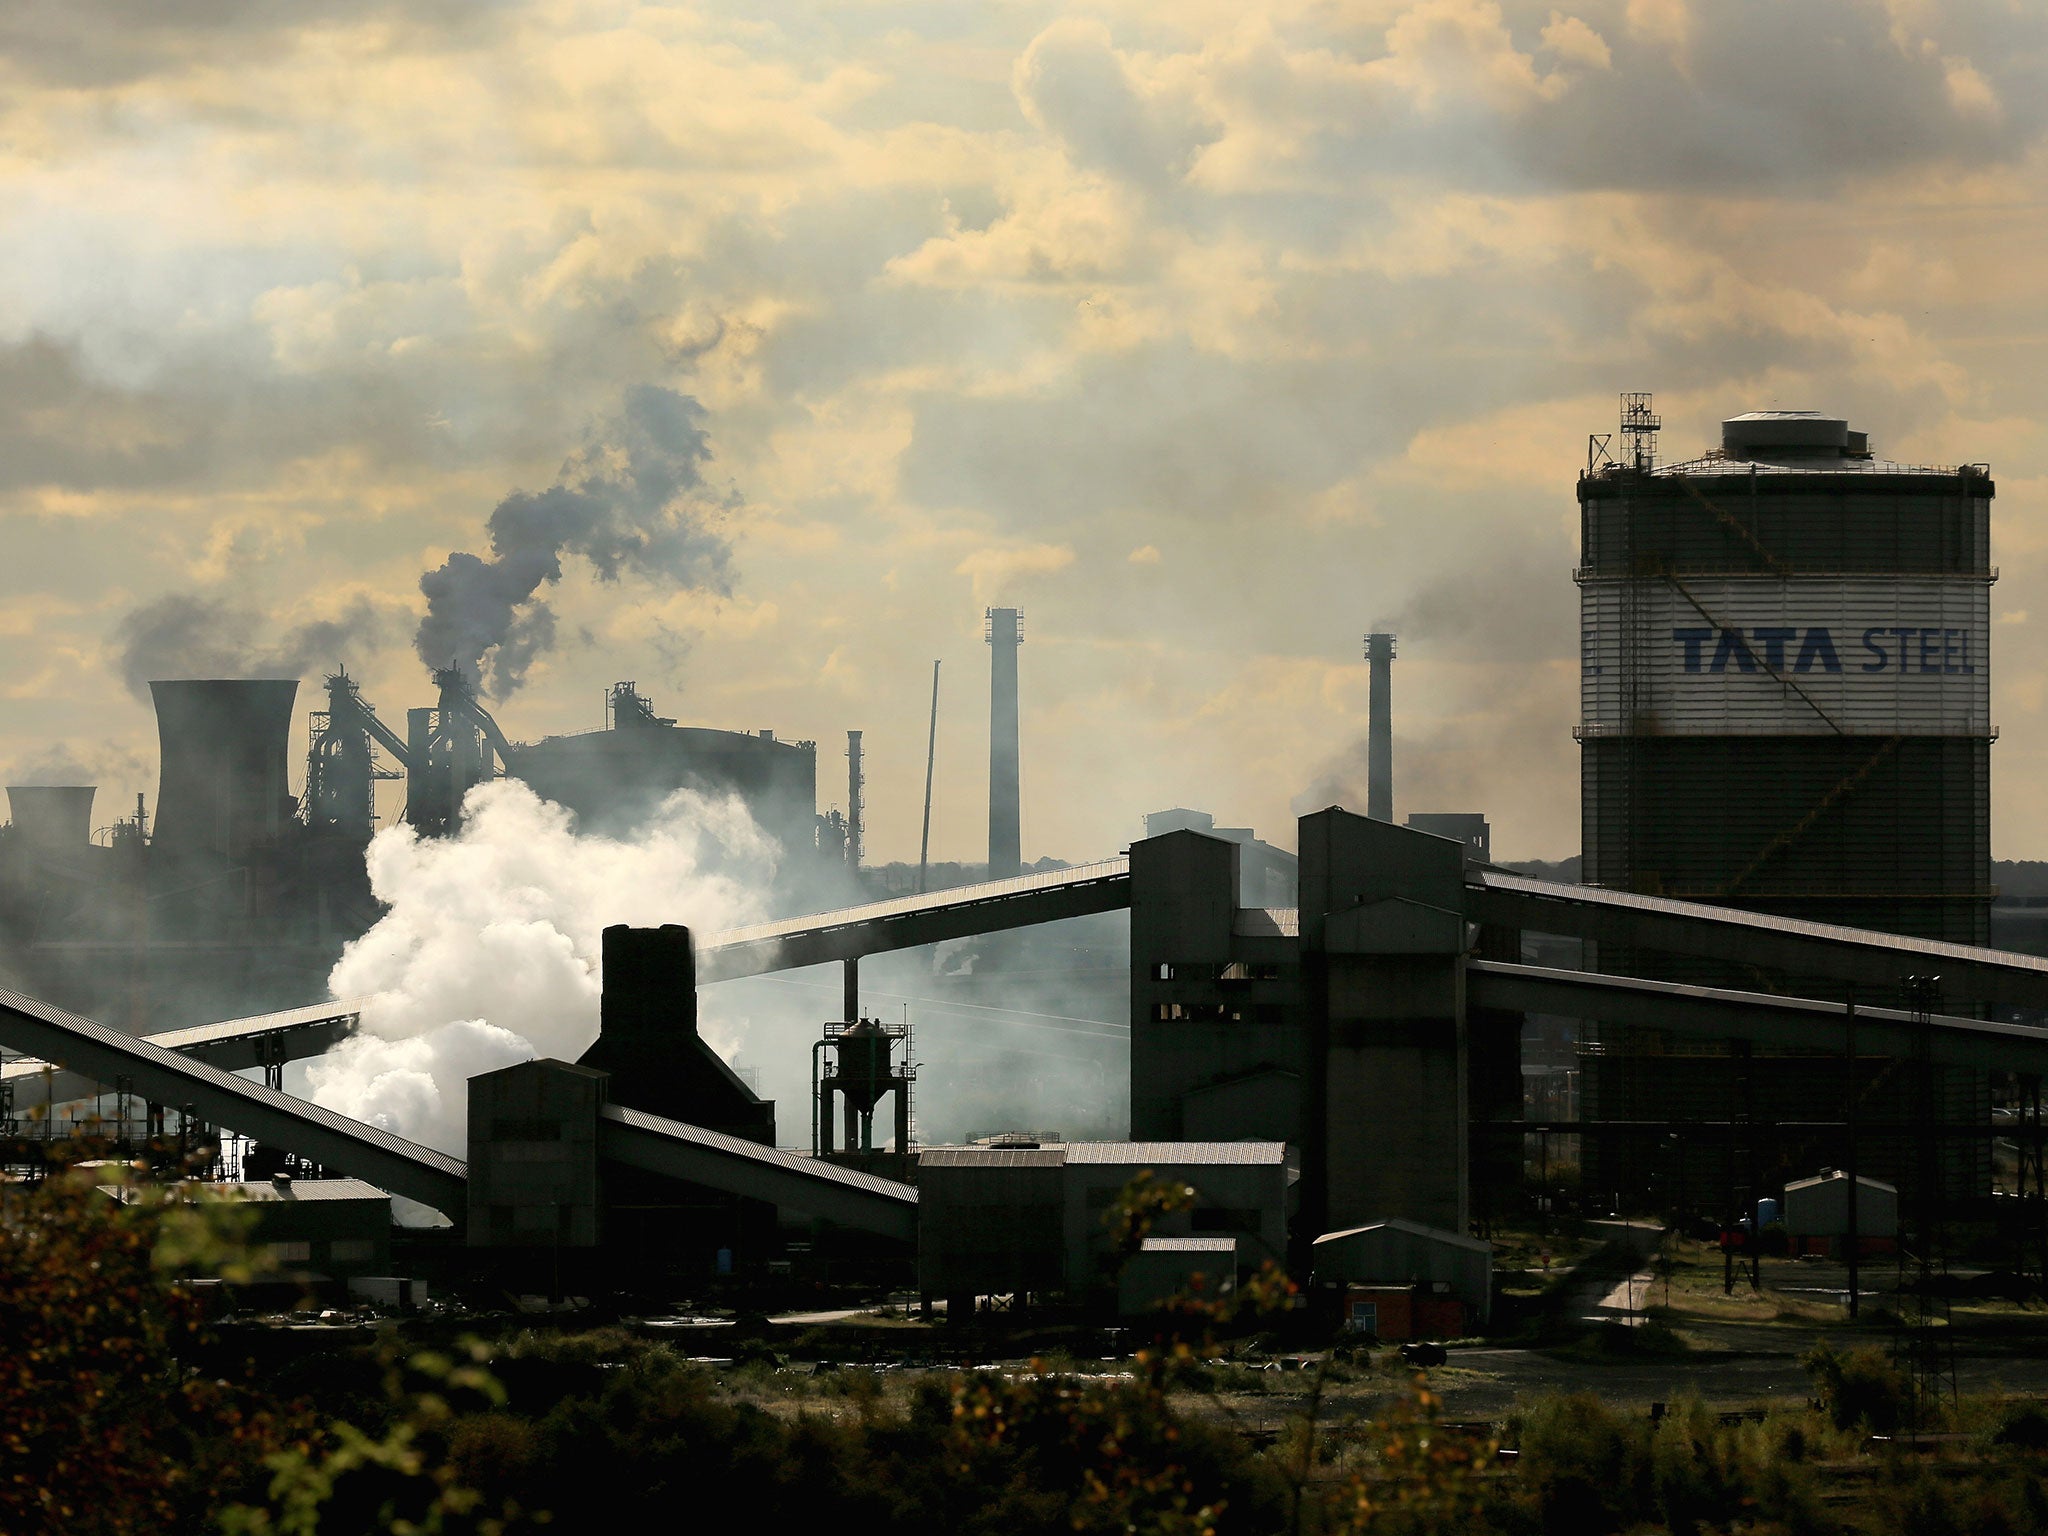 A view of the Tata Steel processing plant at Scunthorpe